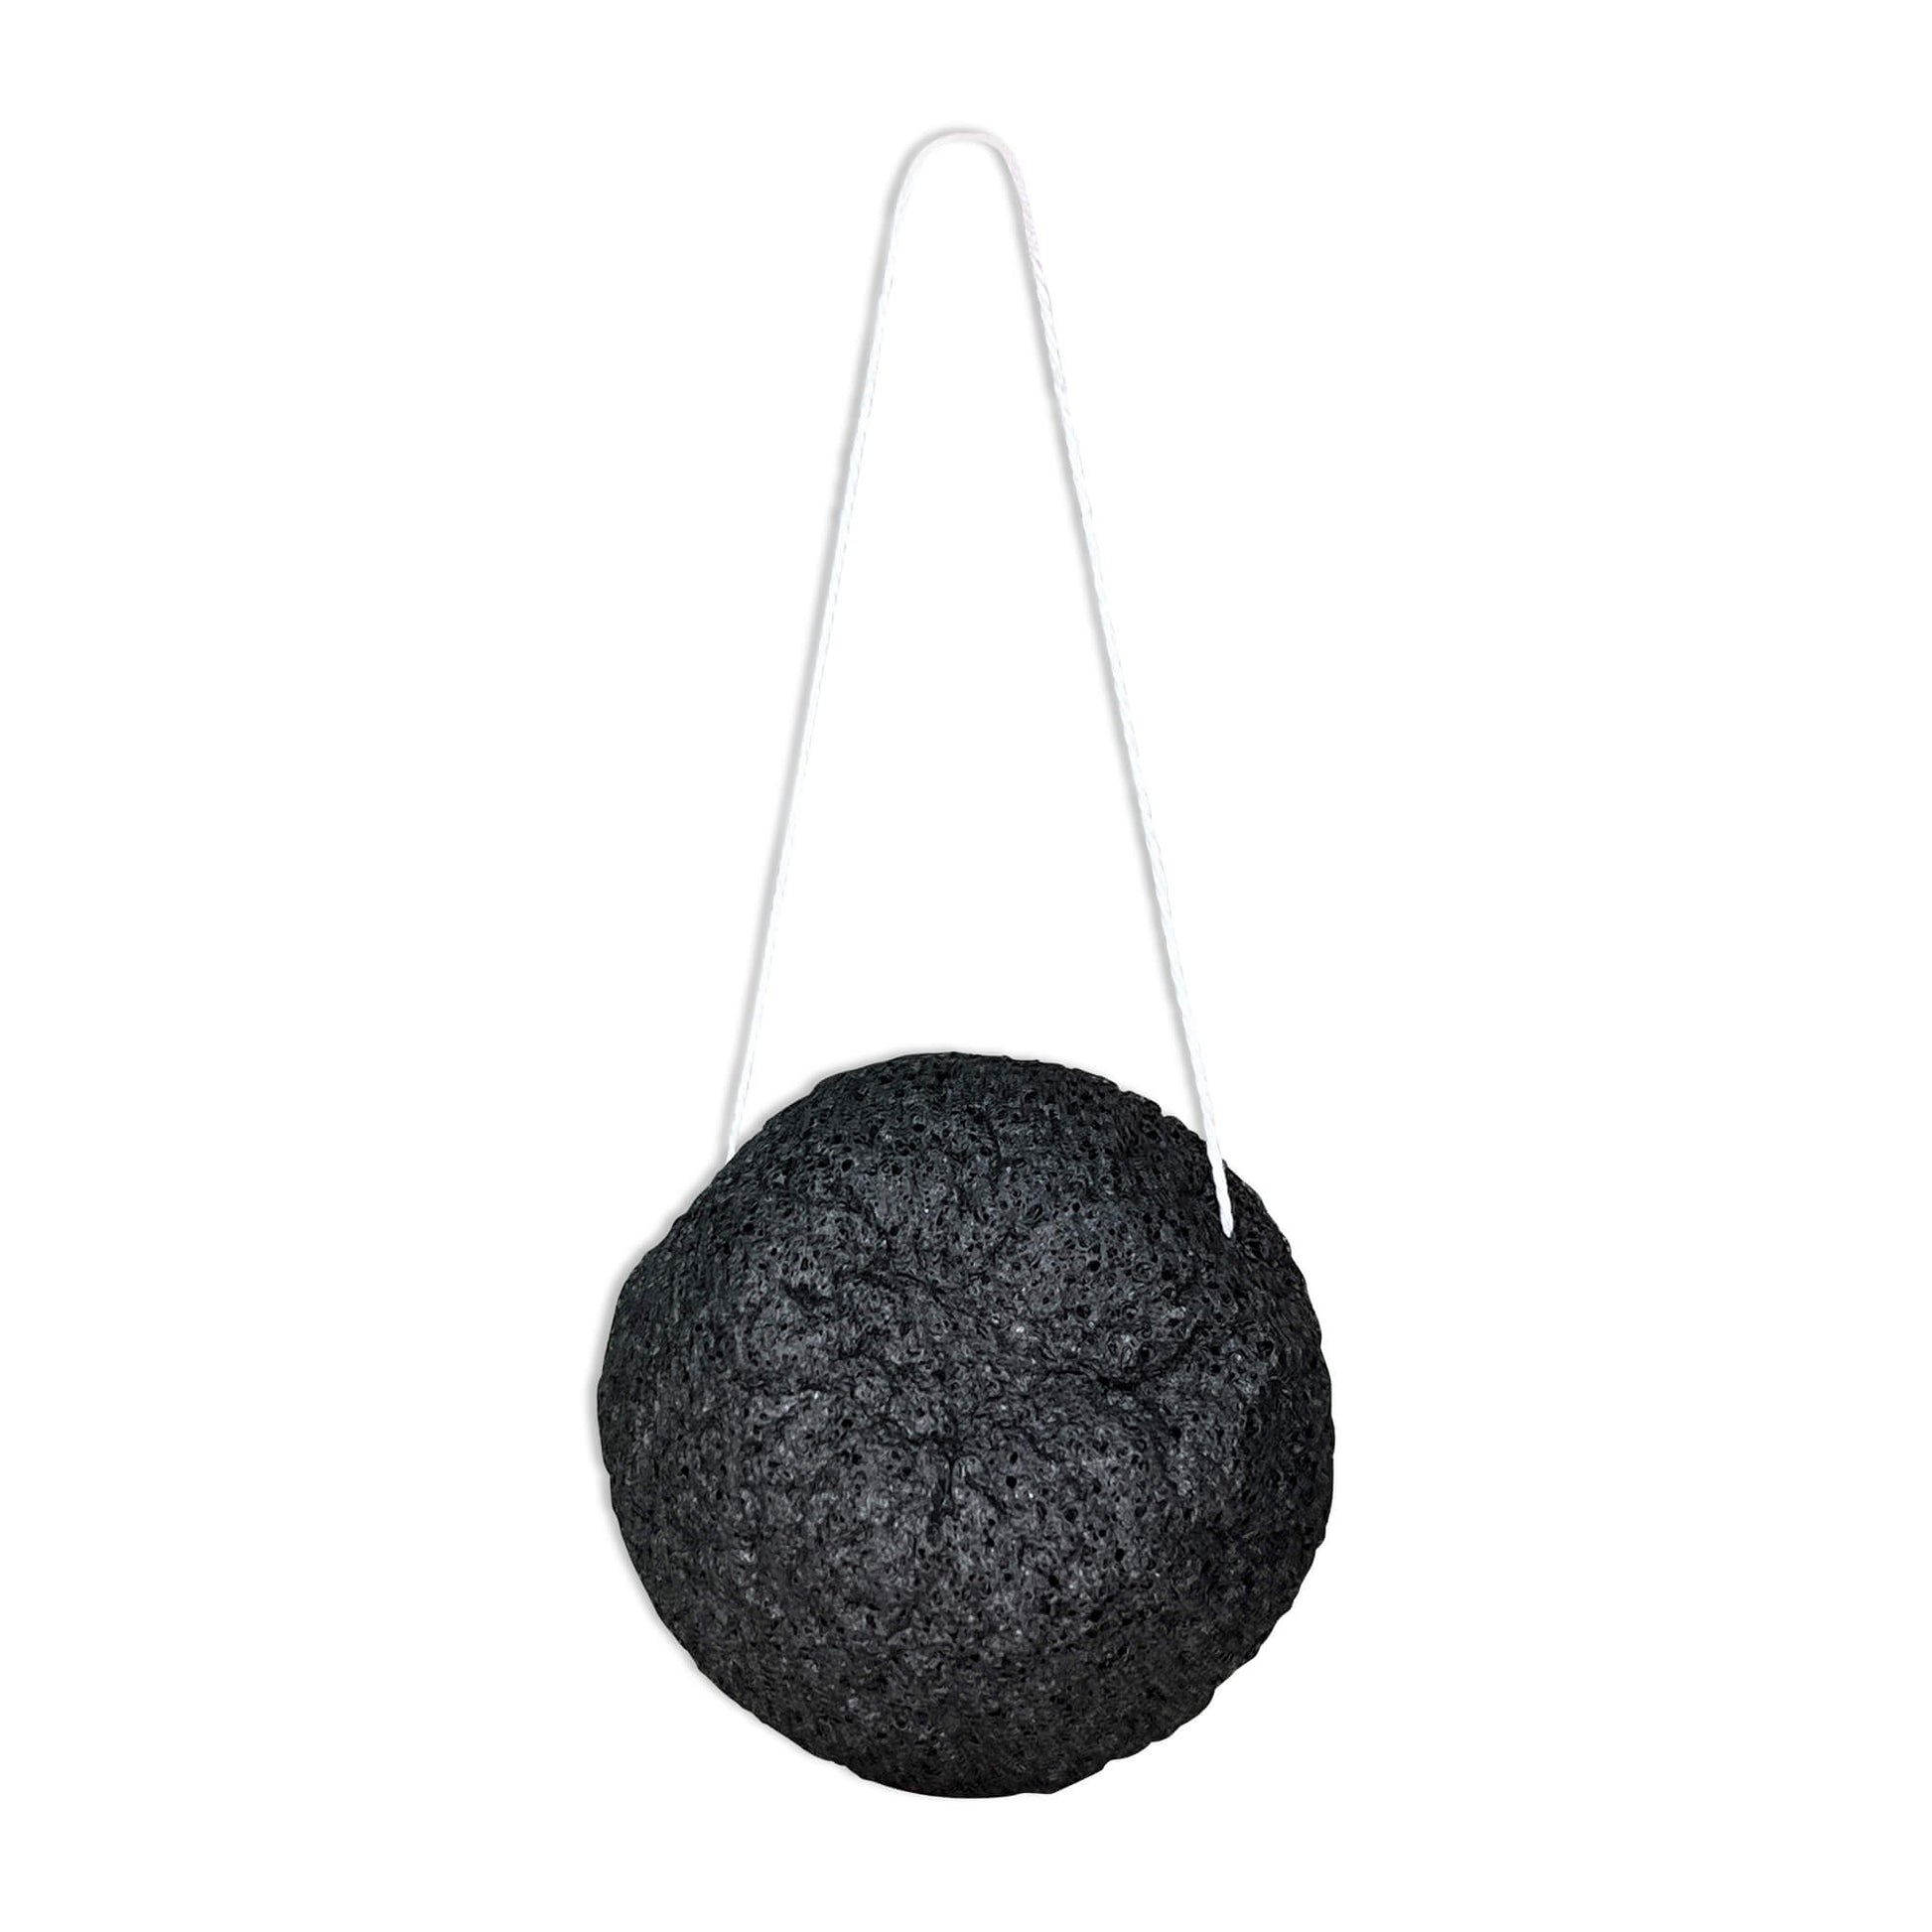 "The all-natural Cruisin Organics Konjac Sponge is the perfect solution for cleaner, smoother skin! Made from konjac root fibers, this biodegradable sponge gently exfoliates and removes impurities when used with your favorite cleanser. Its unique rounded shape fits perfectly in your hand for a daily facial routine. Try it now for a better exfoliating face scrub!"